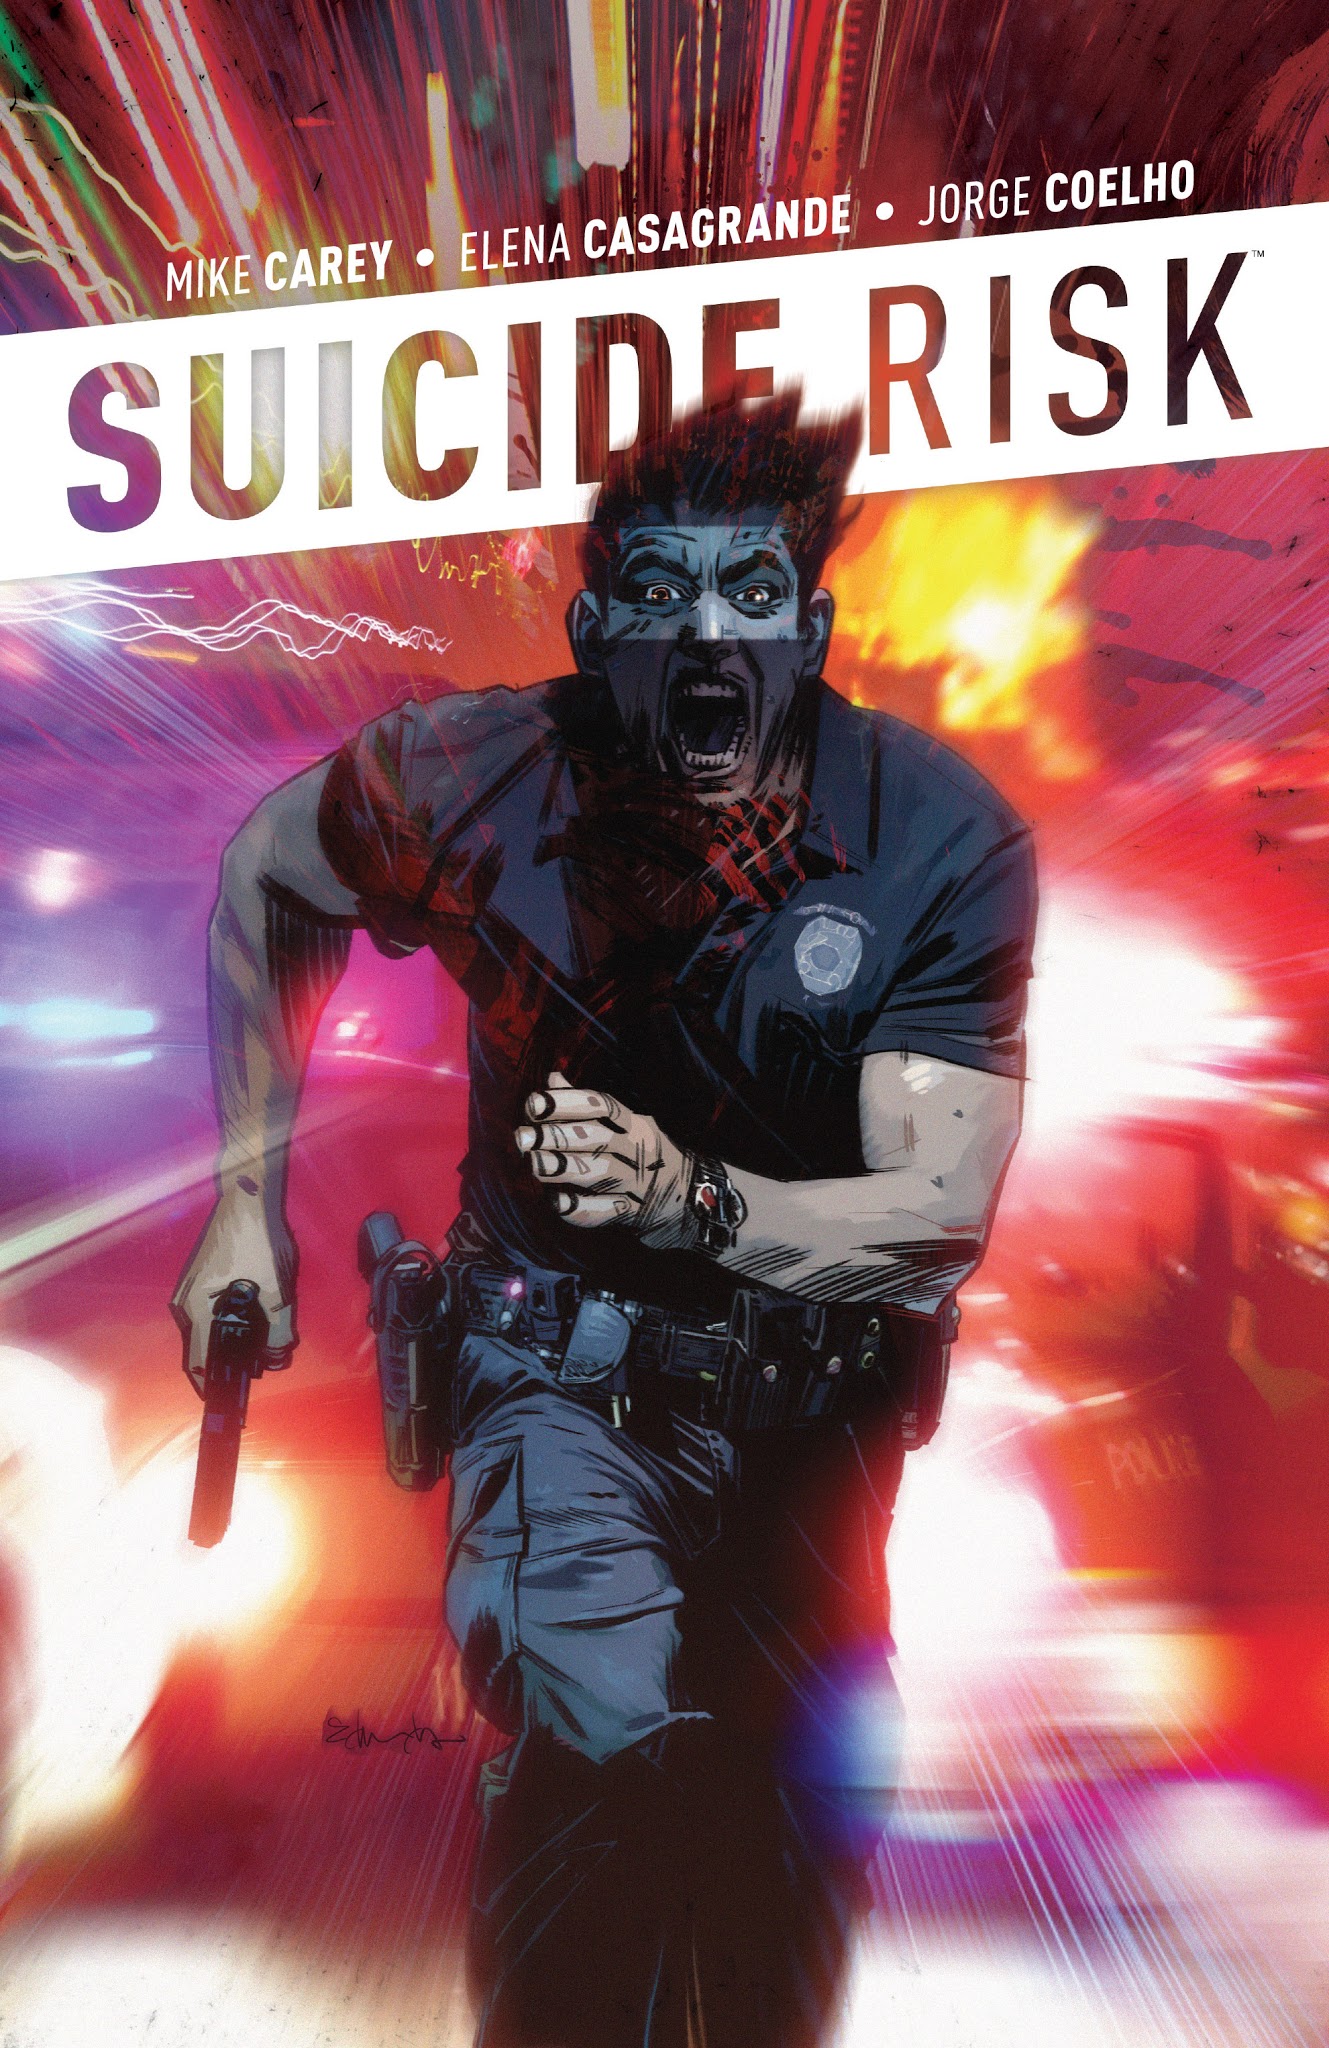 Read online Suicide Risk comic -  Issue # _TPB 3 - 1